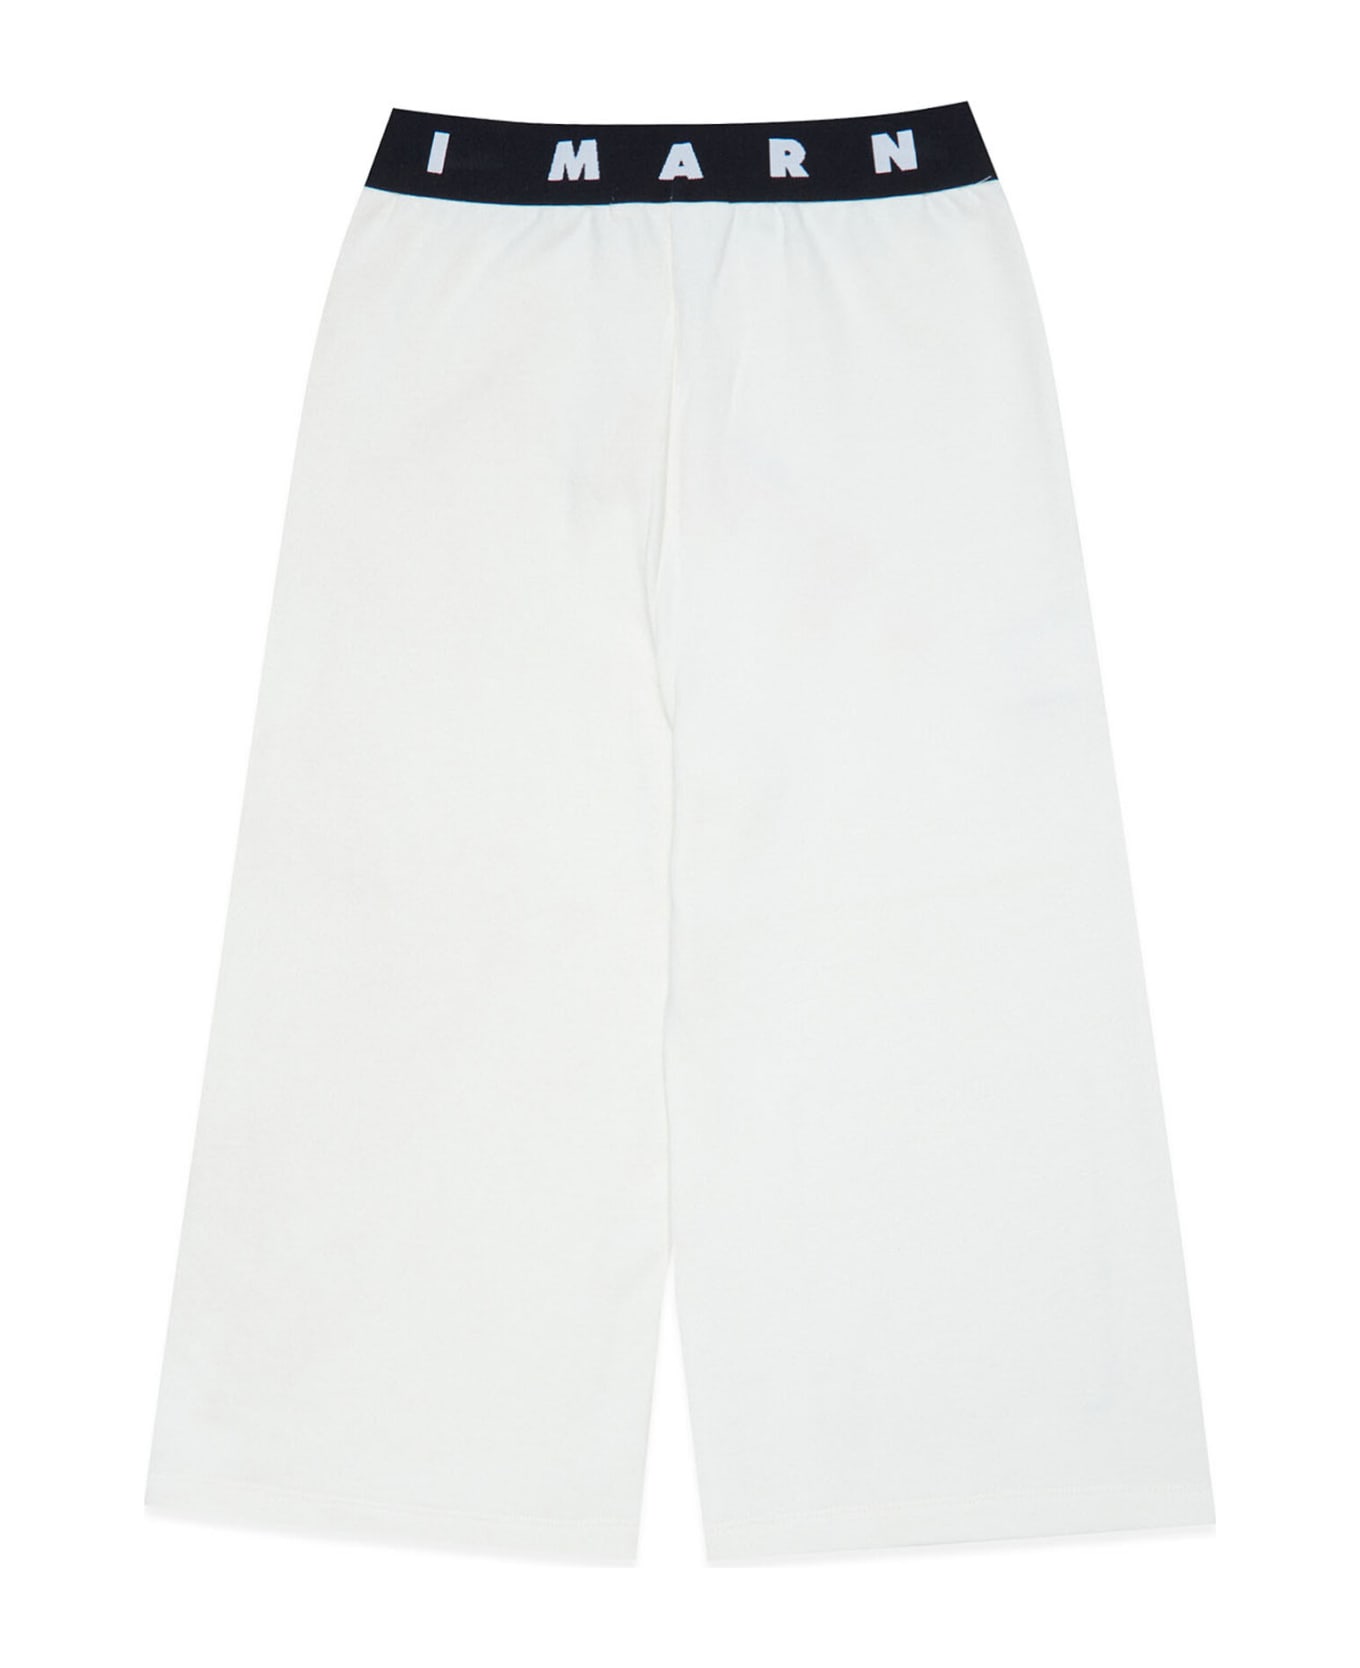 Marni Mp130f Trousers Marni White Cotton Trousers With Printed Face - Milk